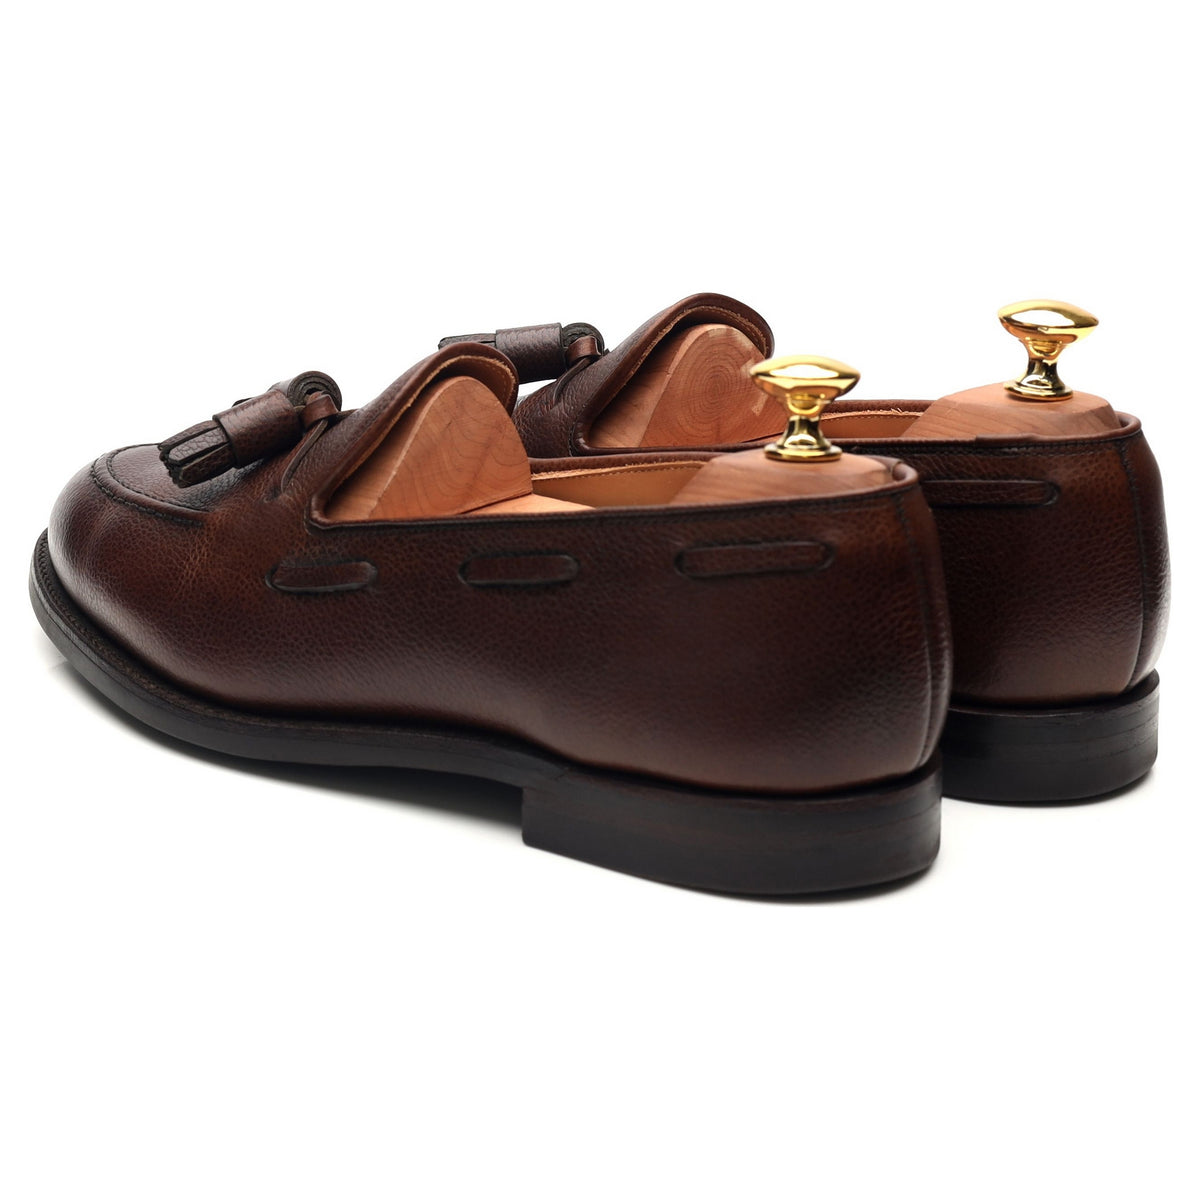 Cavendish 2' Dark Brown Leather Tassel Loafers UK 6 E - Abbot's Shoes